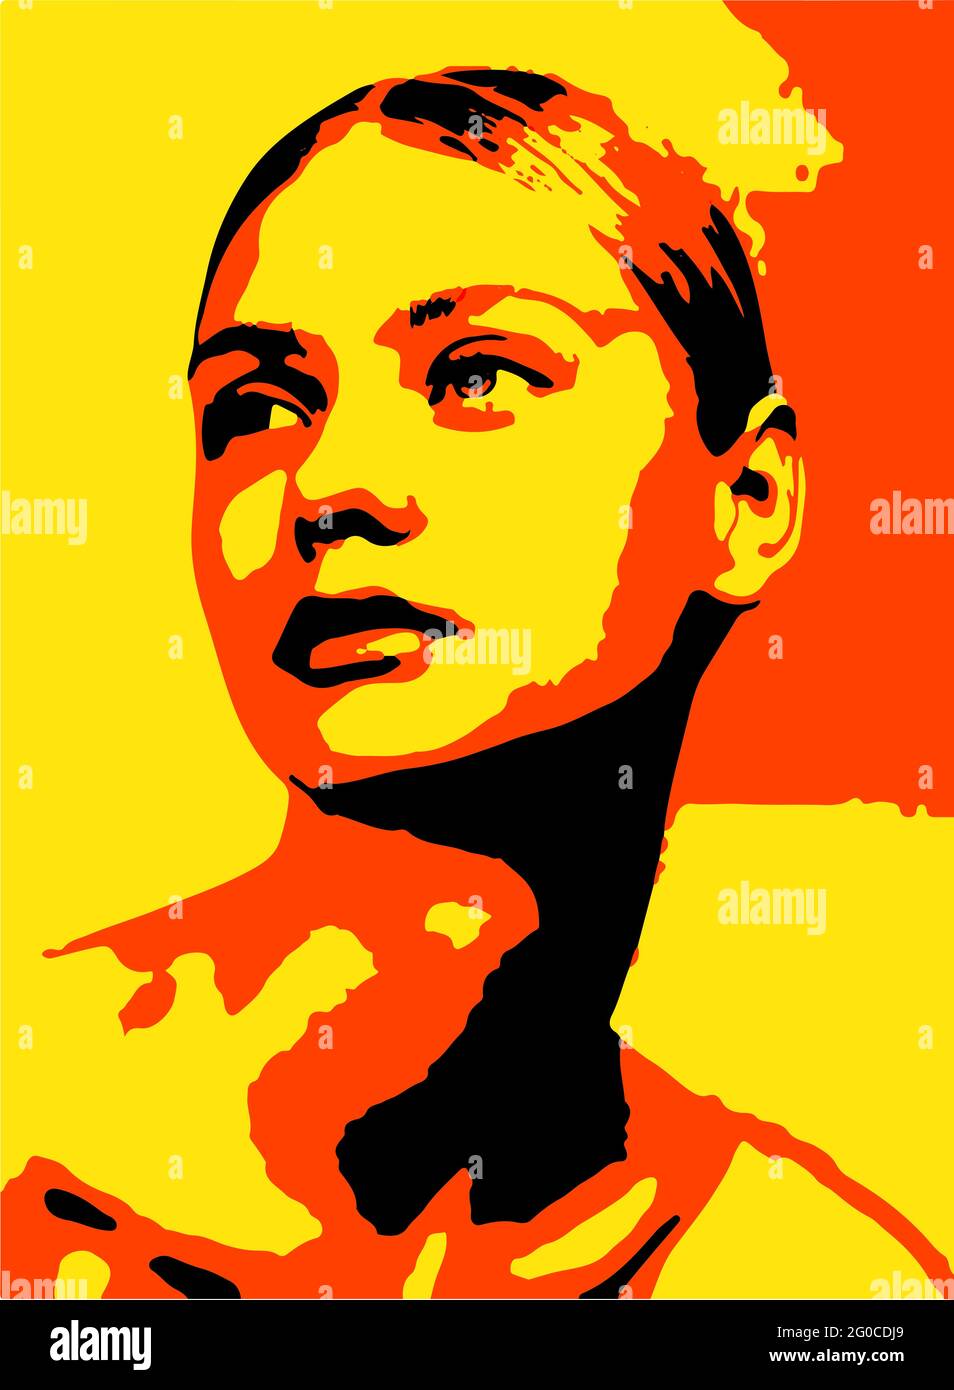 Poster wall images - photography stock hi-res and Alamy